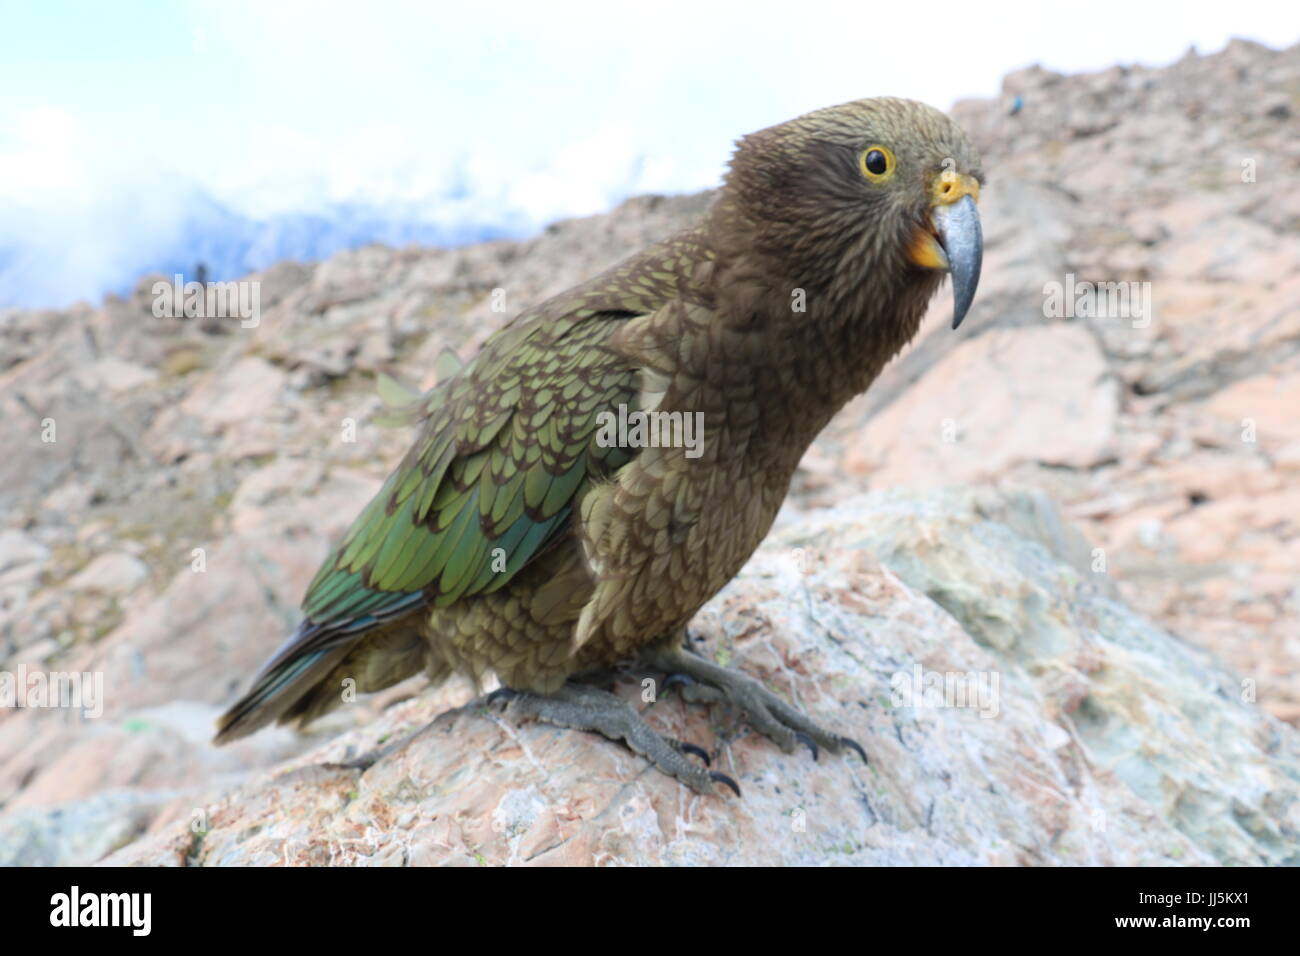 Curious bird seated on rock looking at the camera near Mueller hut in the Mt Cook National Park on New Zealand's South Island Stock Photo